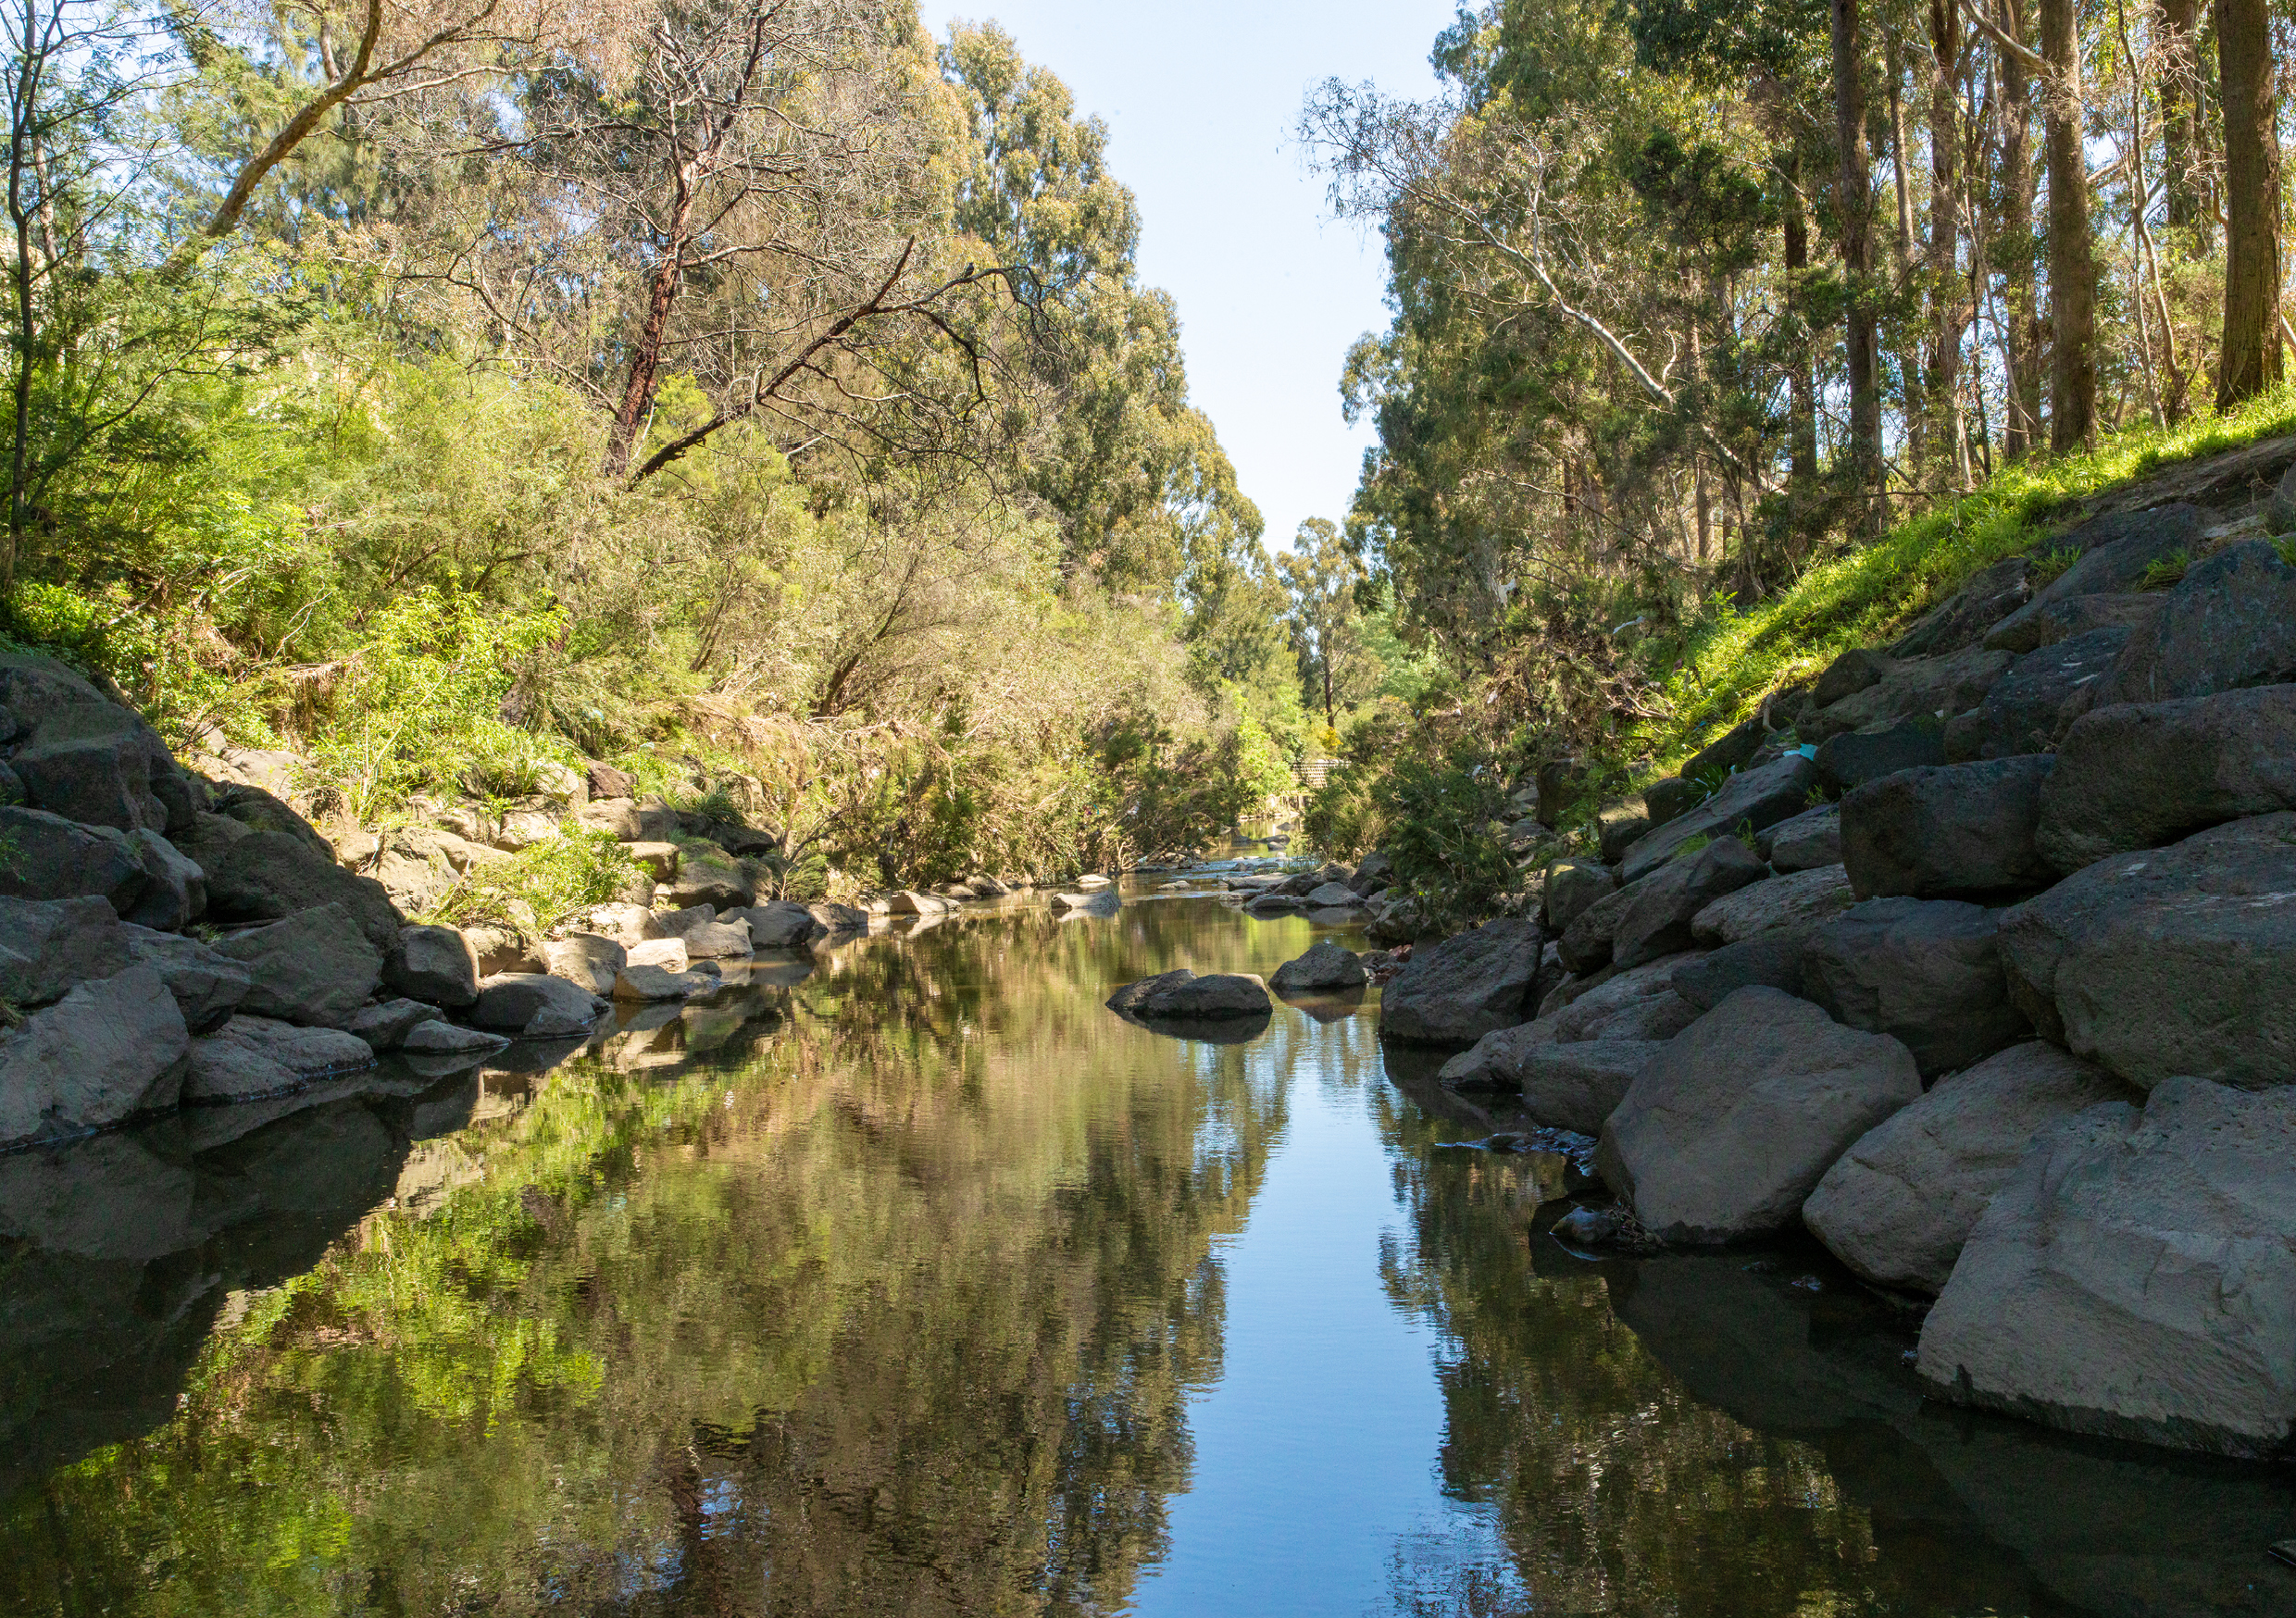 Looking over the calm water of gardiners creek, with dense vegetation on either side